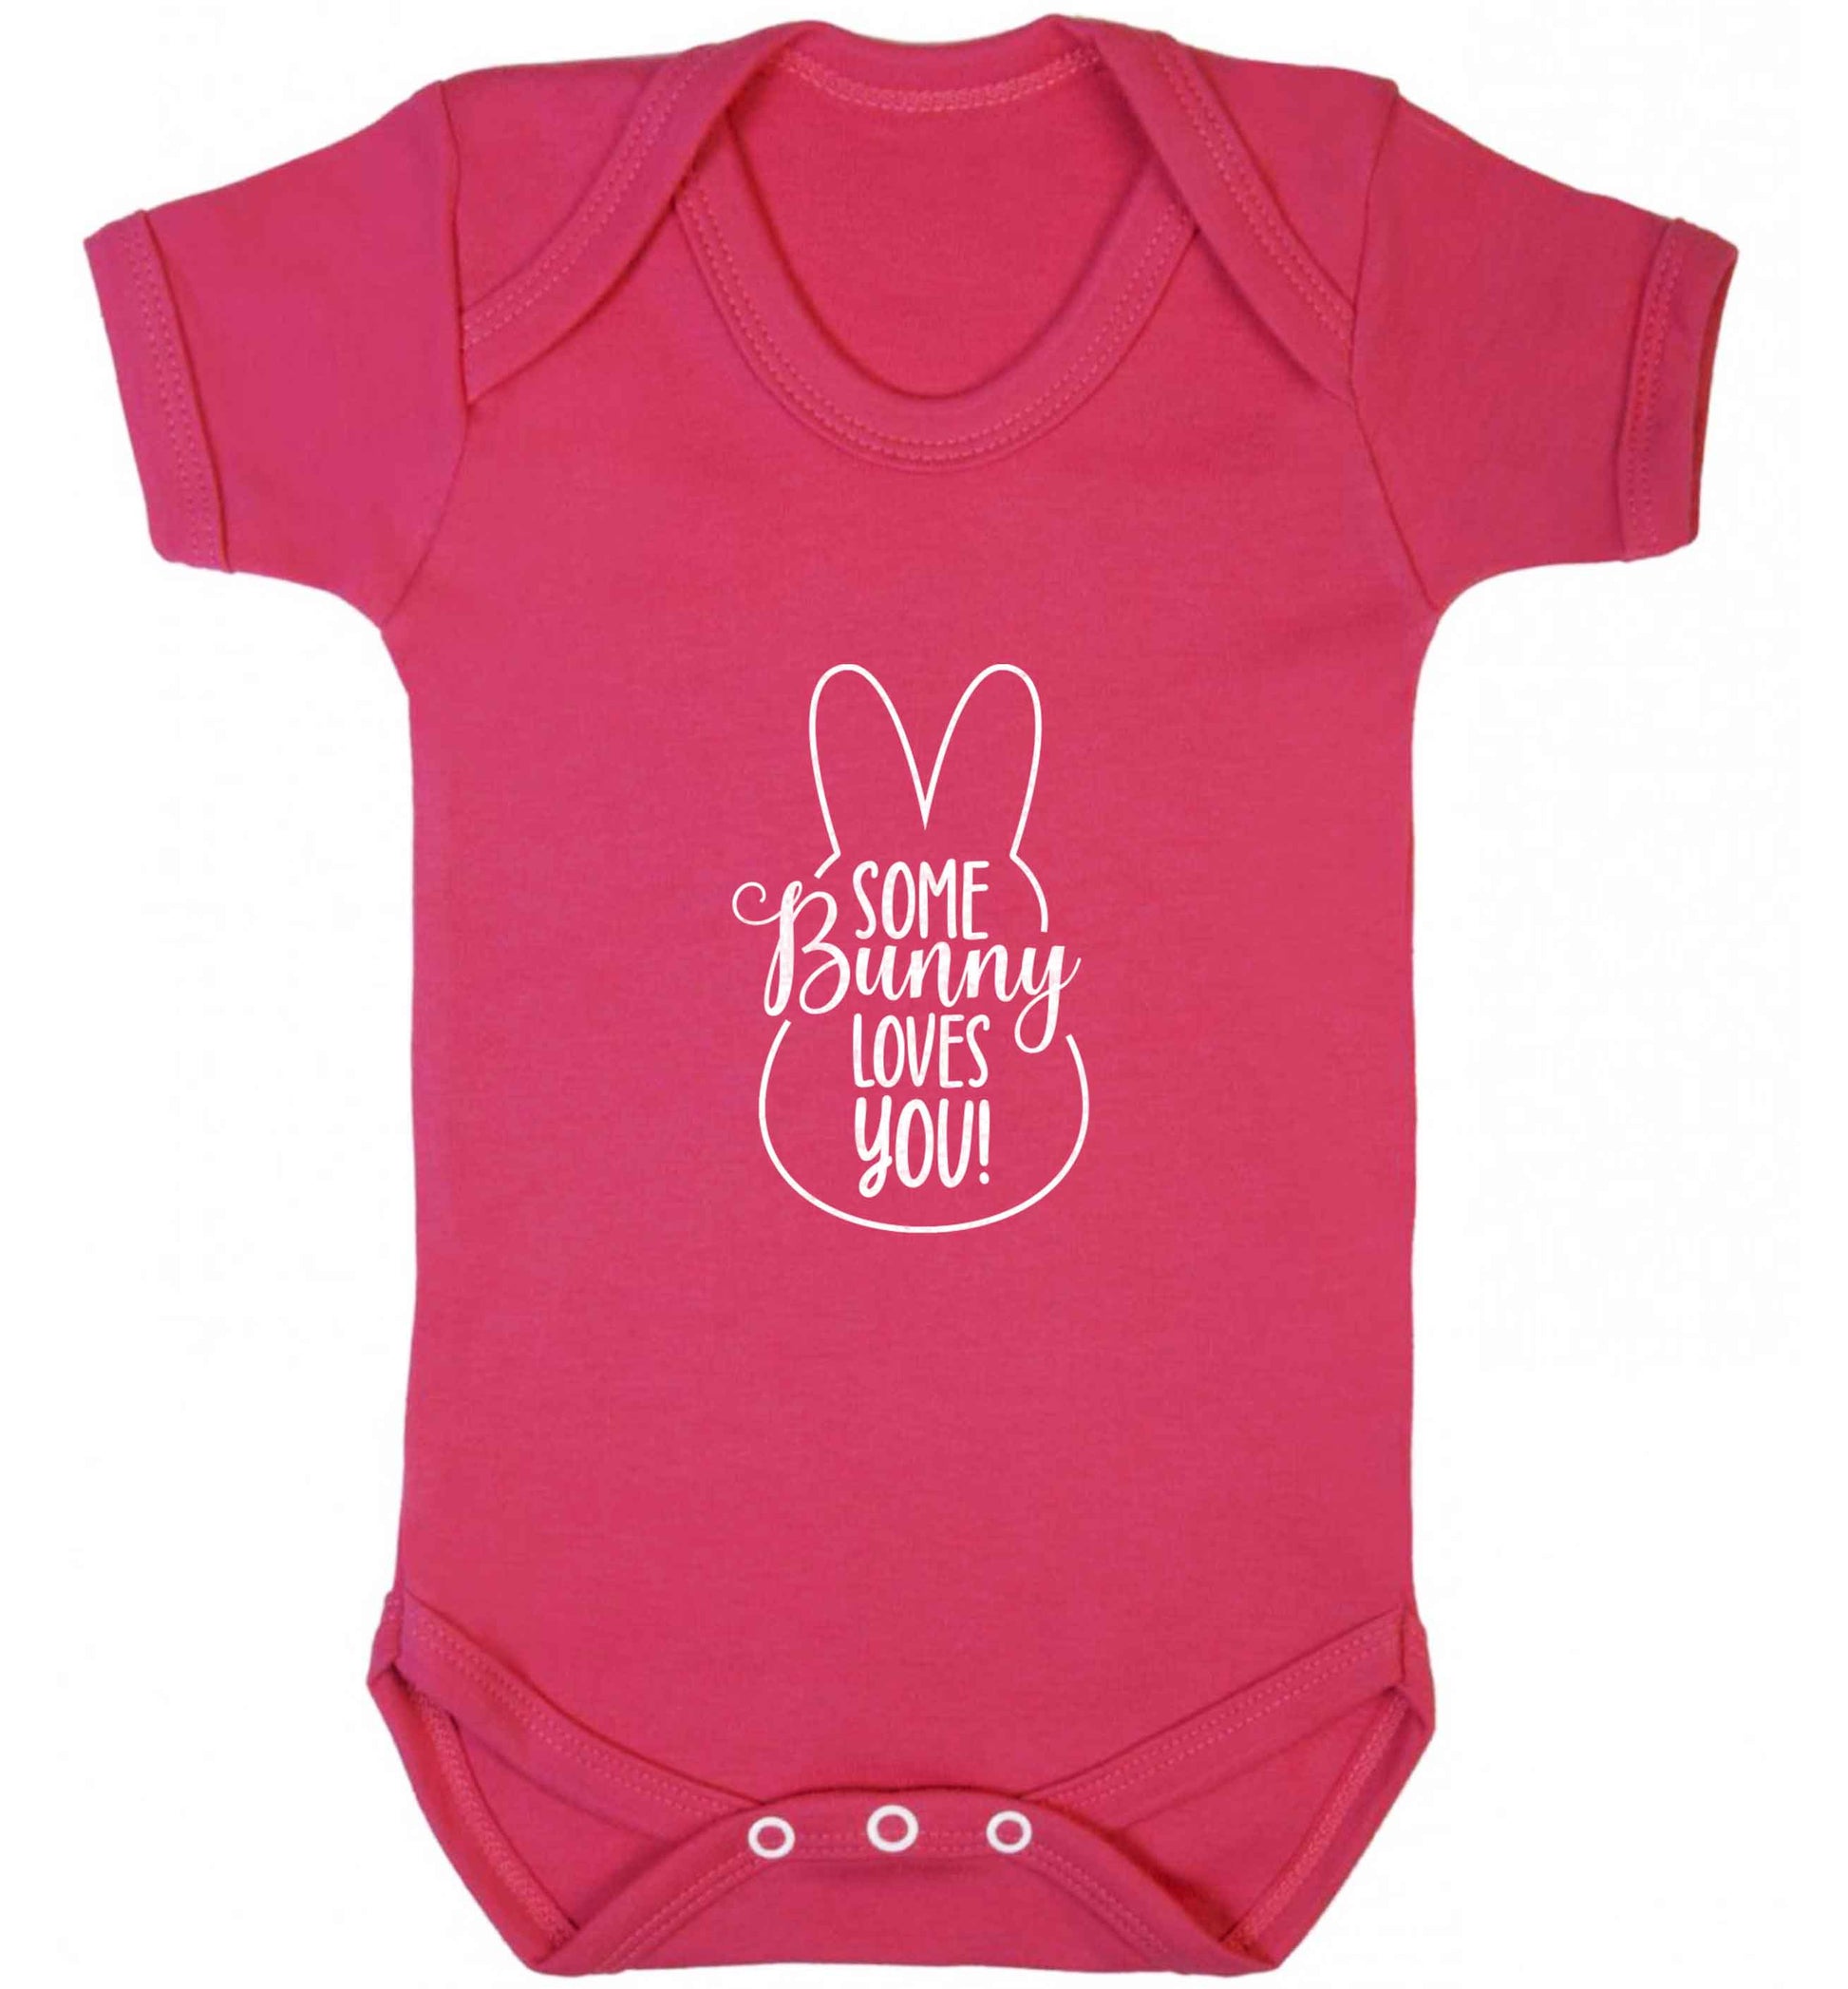 Some bunny loves you baby vest dark pink 18-24 months